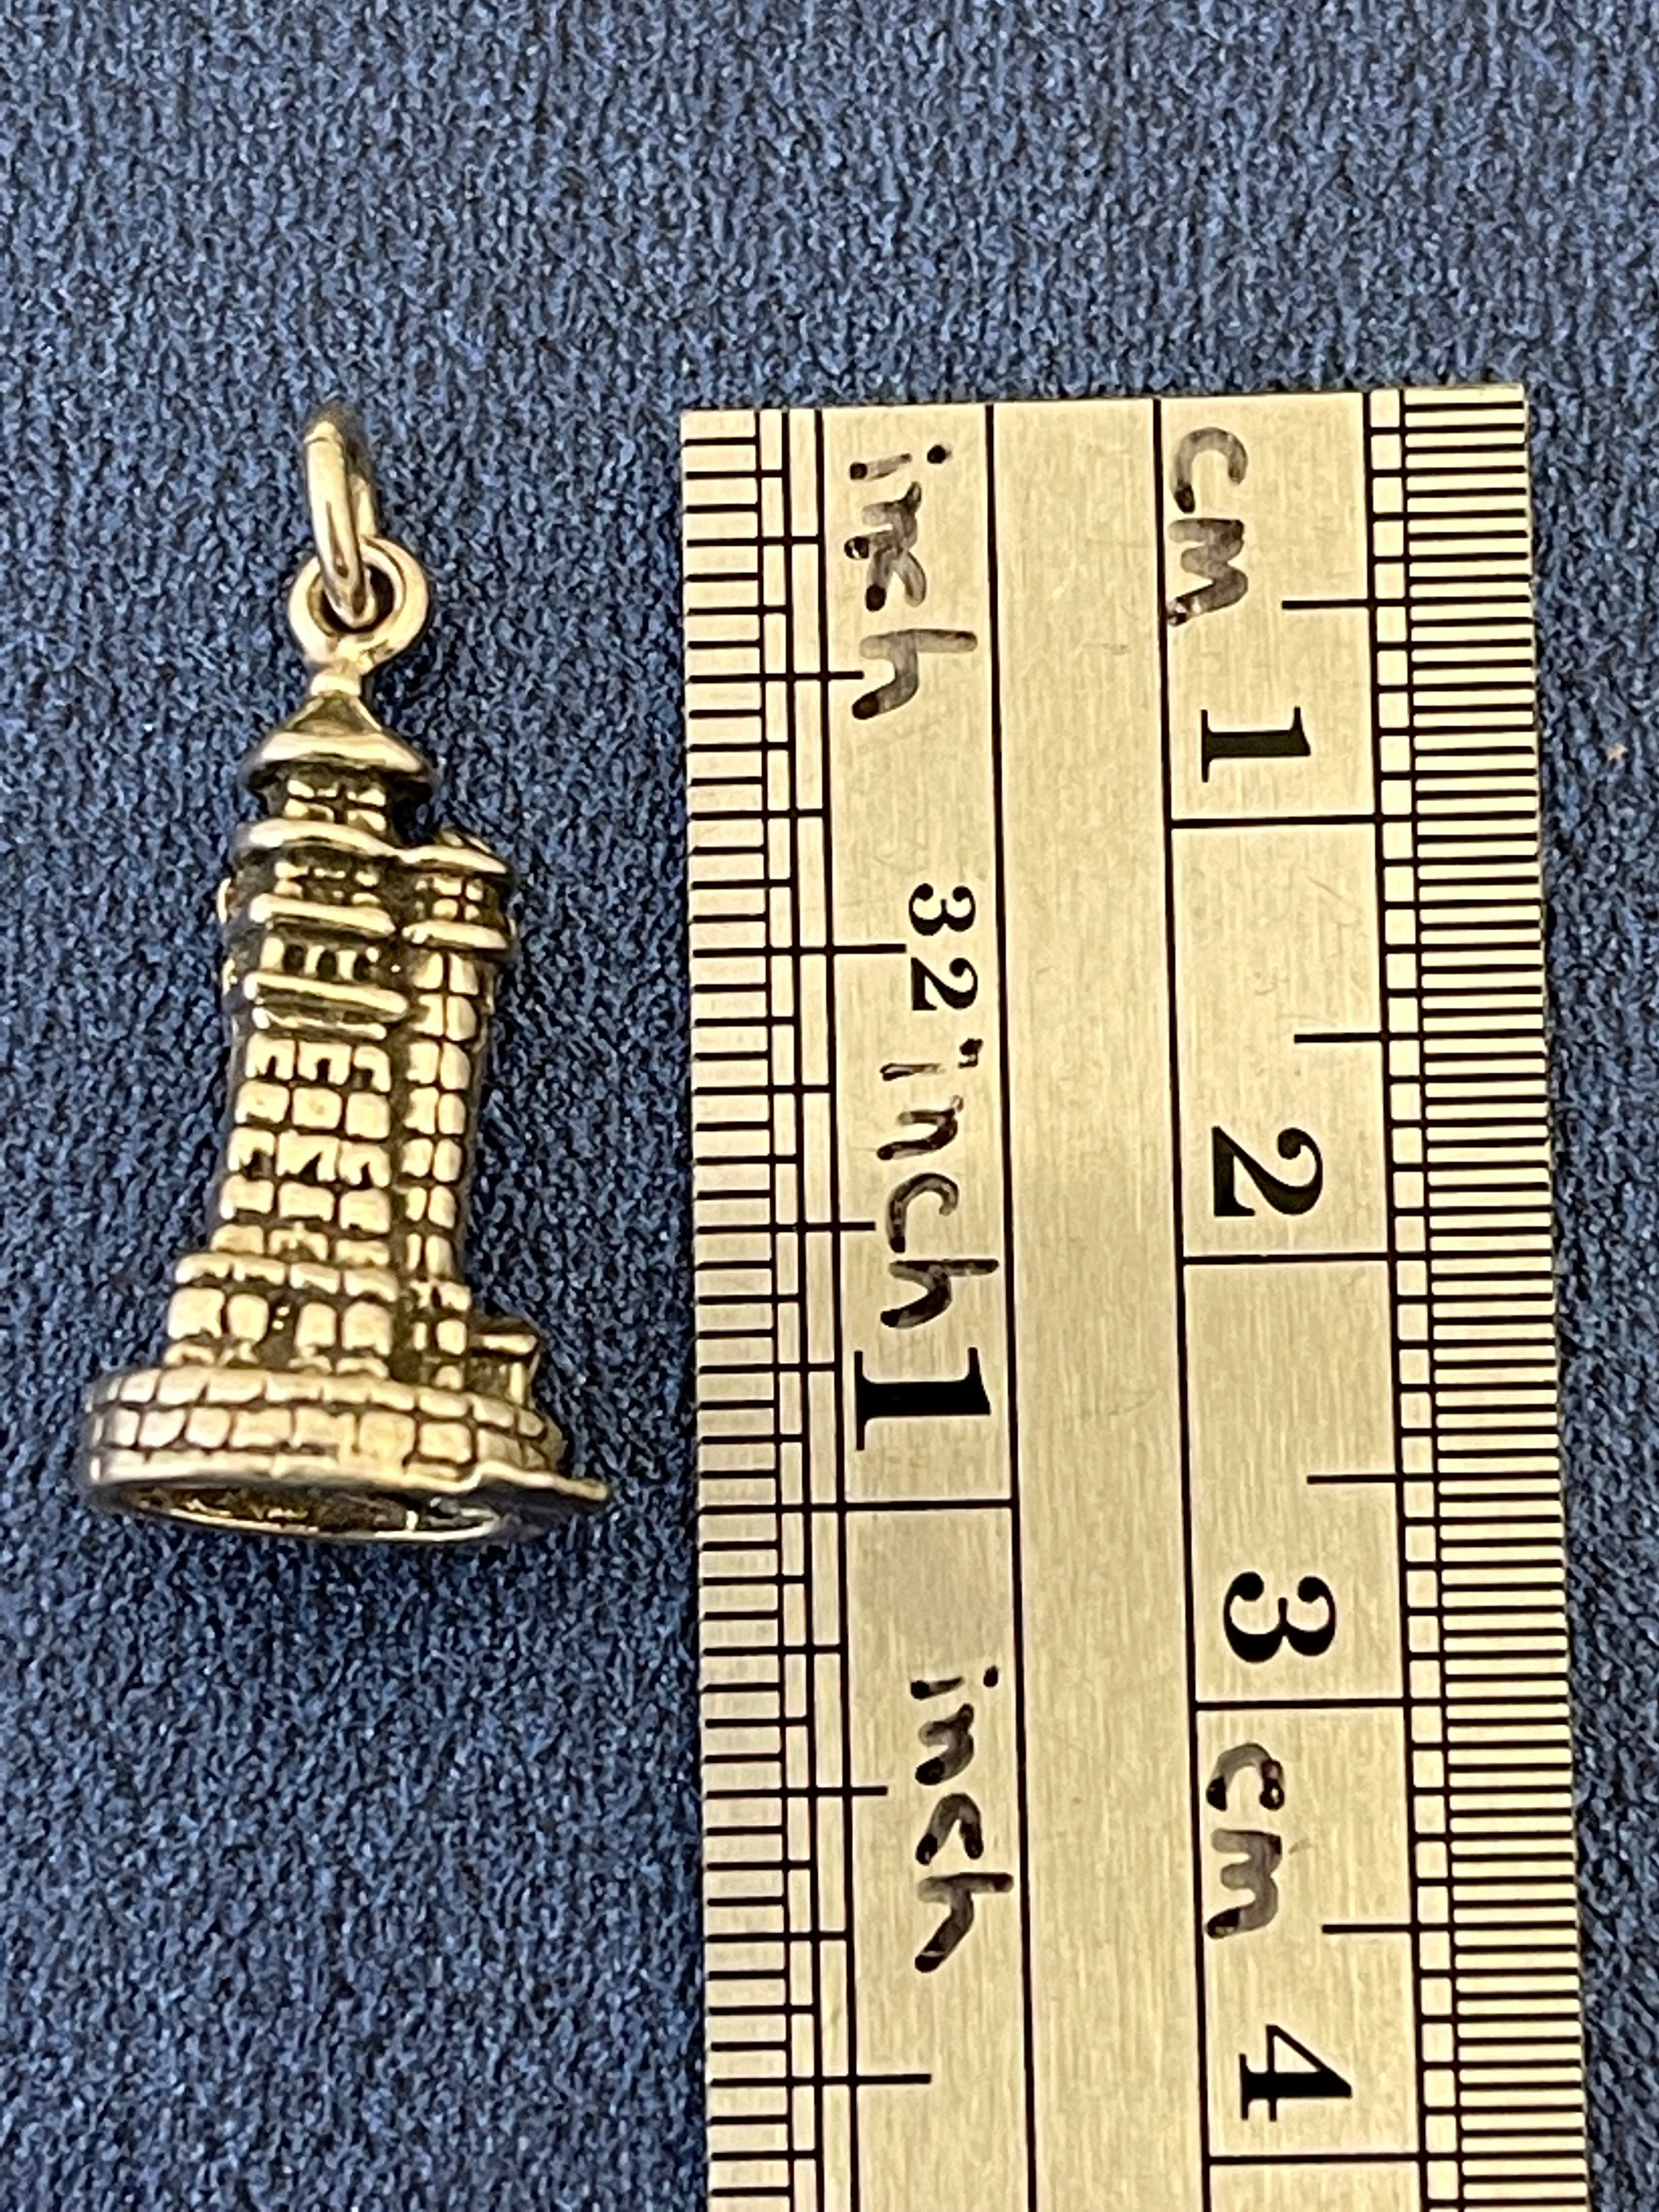 Sterling Silver Antique Finish Lighthouse 3D Pendant Charm